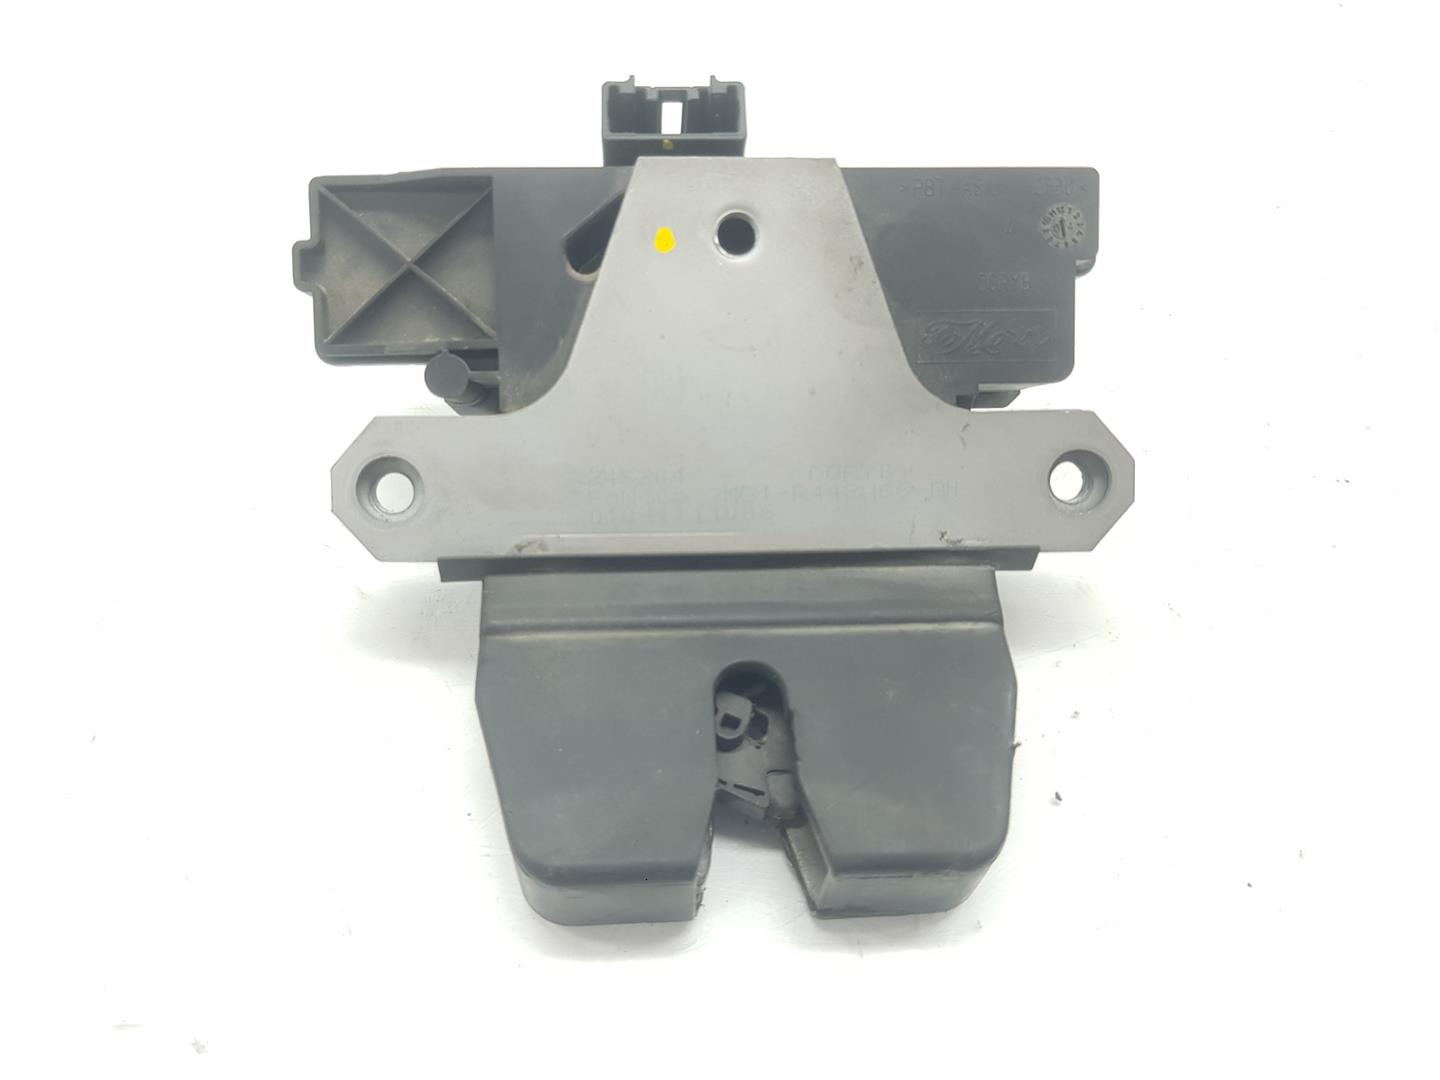 FORD Focus 2 generation (2004-2011) Tailgate Boot Lock 1570448, 1920840 19900014